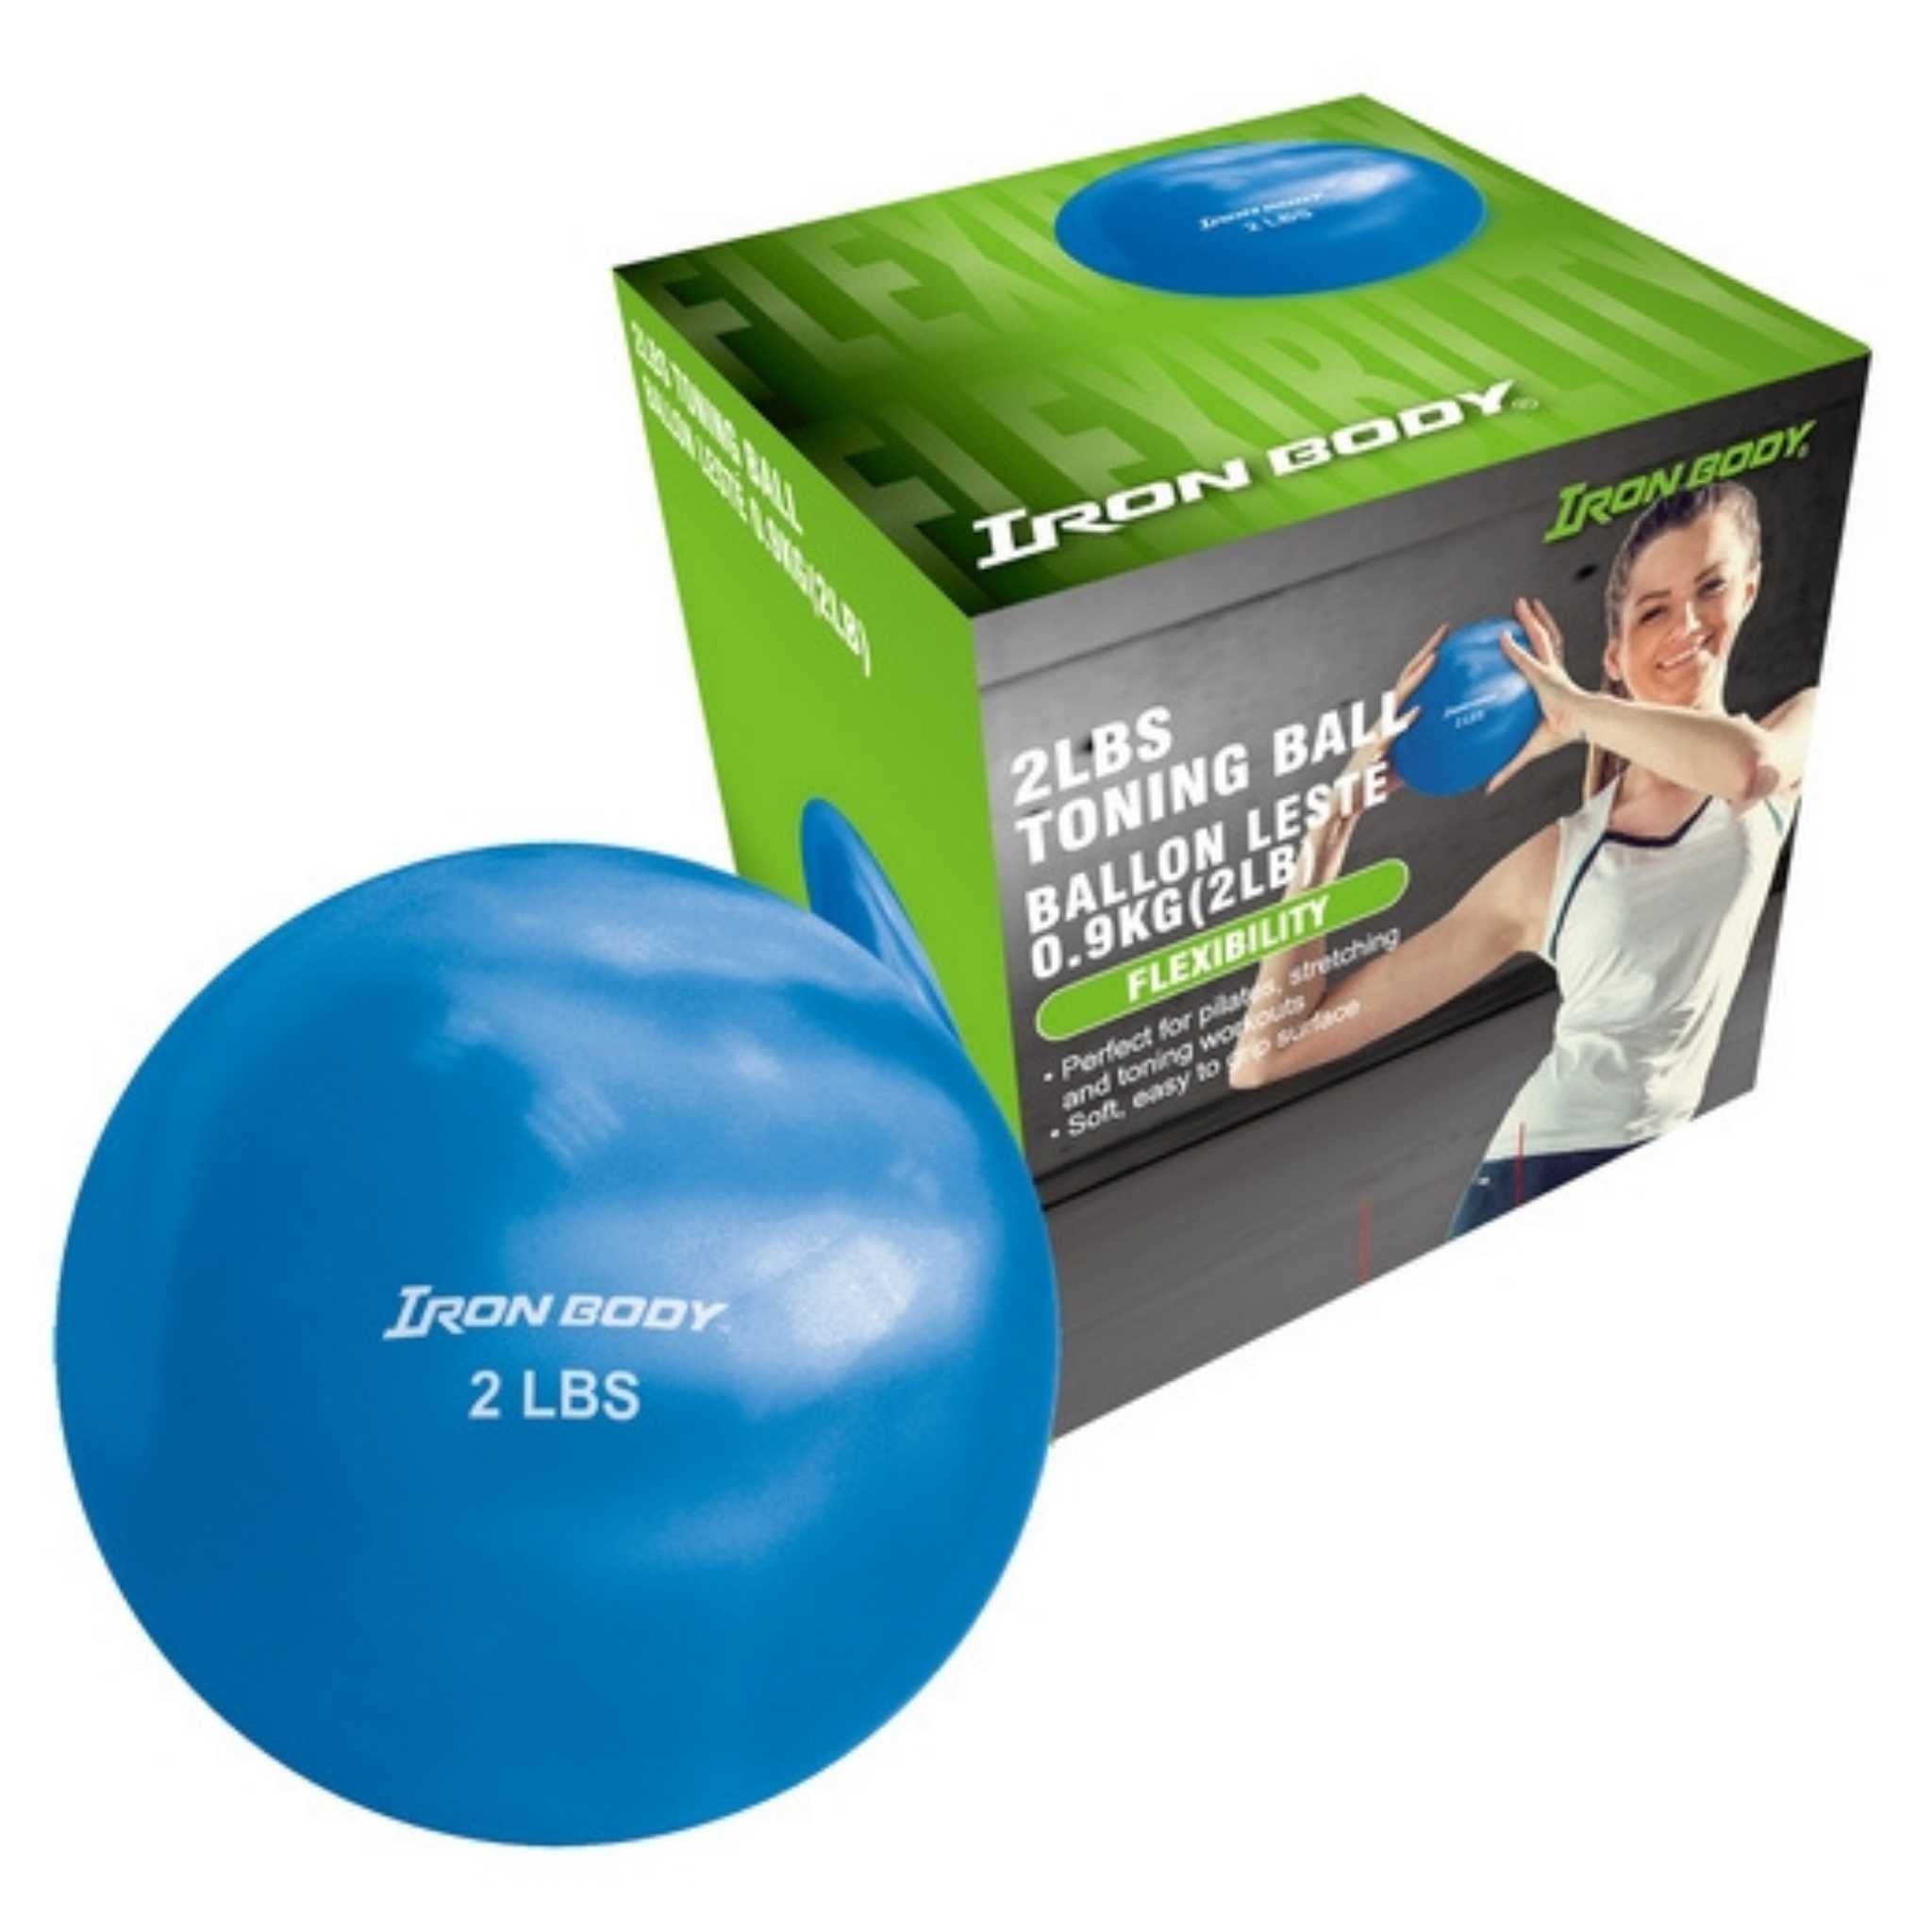 Toning Balls, For Pilates, Yoga, Aerobics, and Stretching, Available in 2 and 4 lbs.